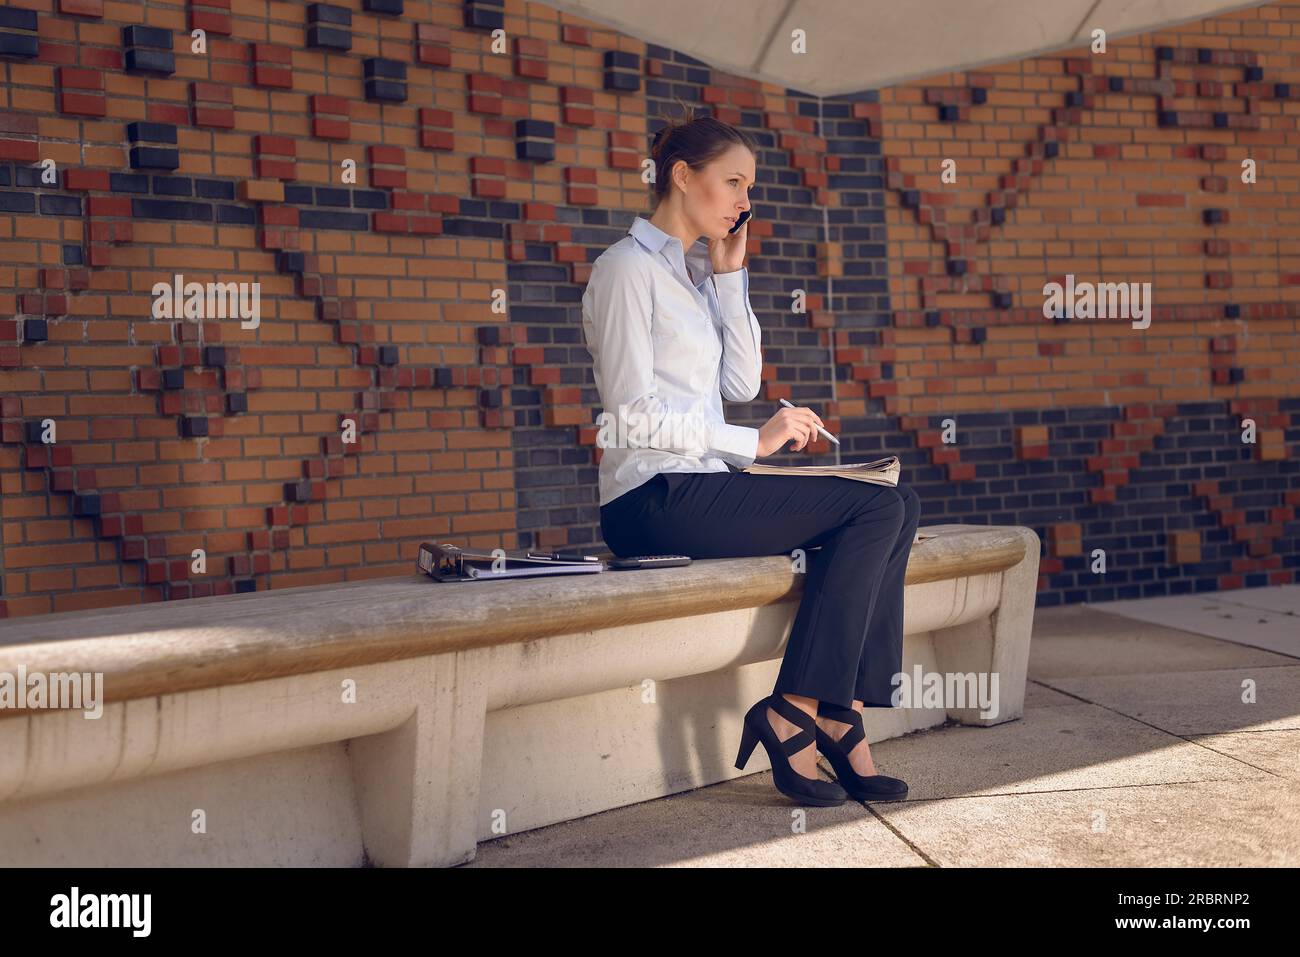 Woman doing business in a commercial foyer sitting on a wall mounted bench against patterned brickwork talking on her mobile phone discussing her Stock Photo